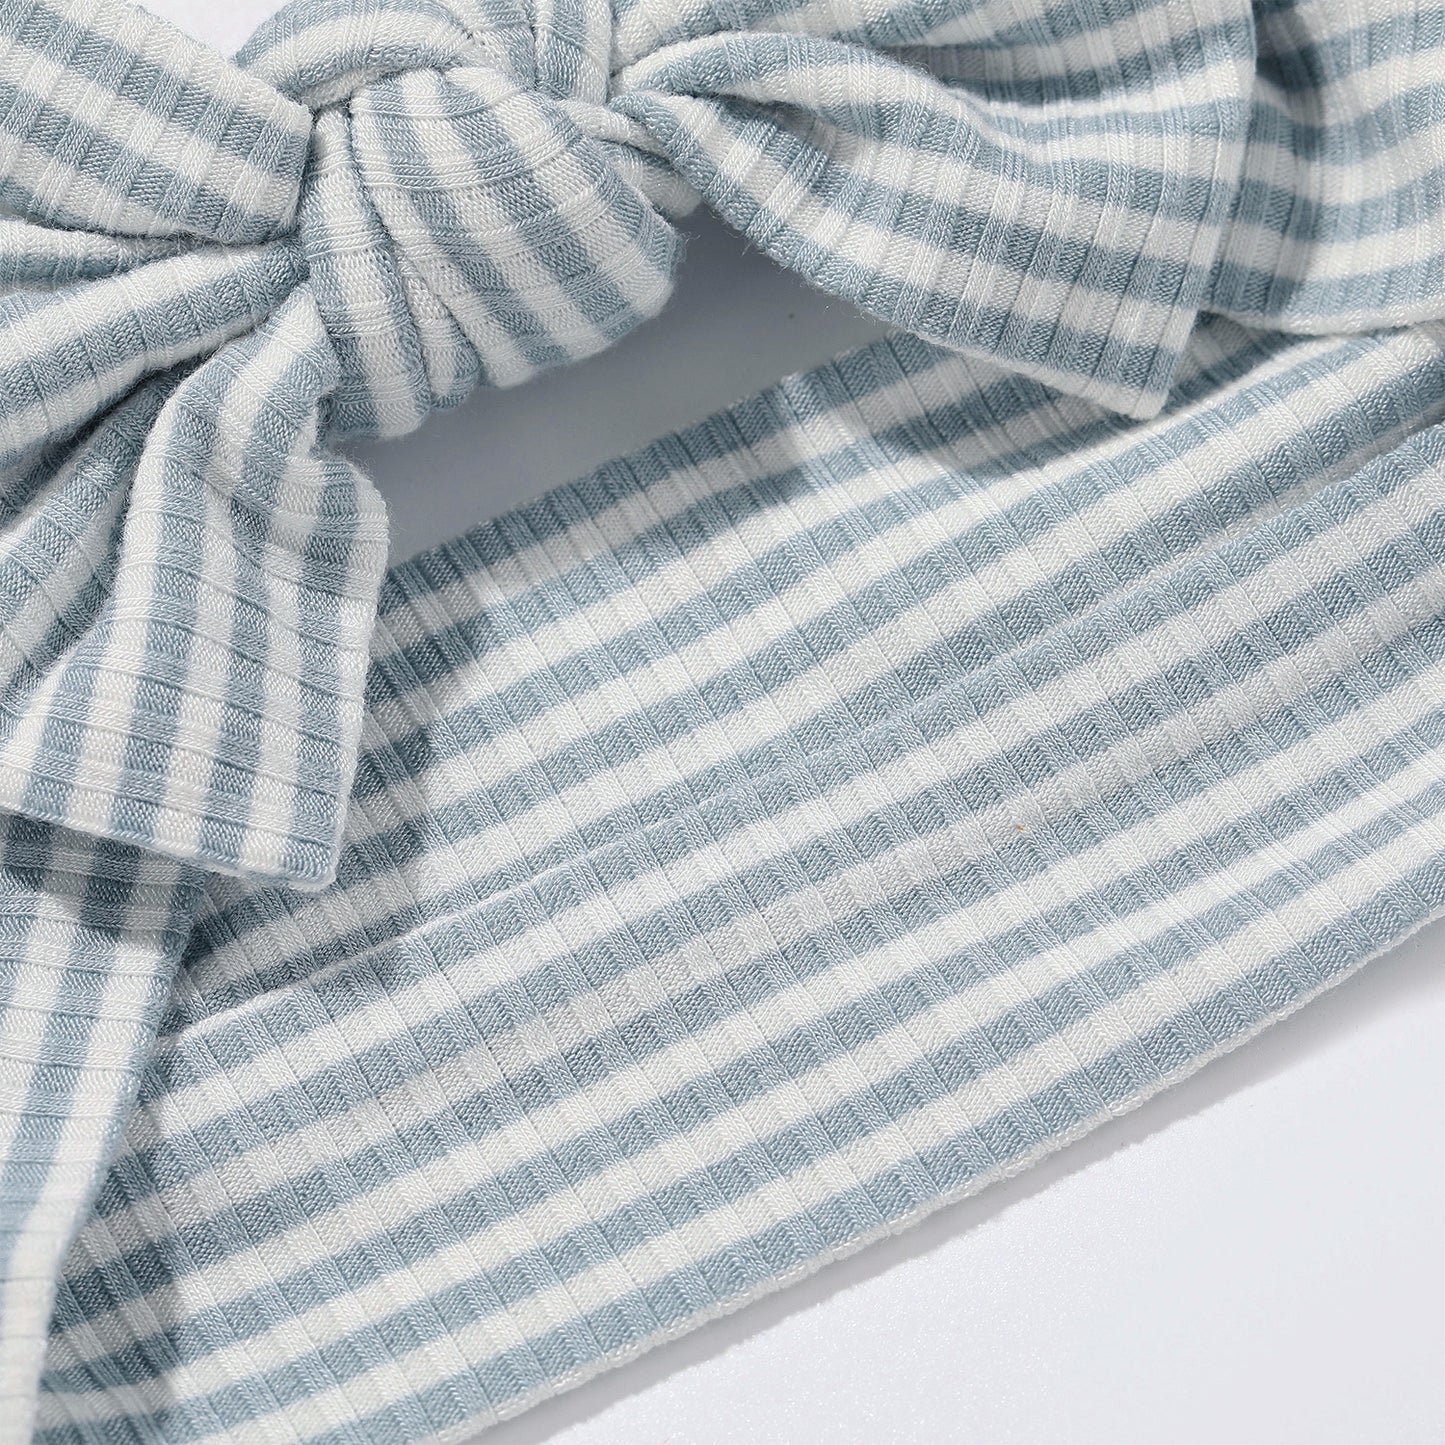 Blue Small Stripe Ribbed Bow